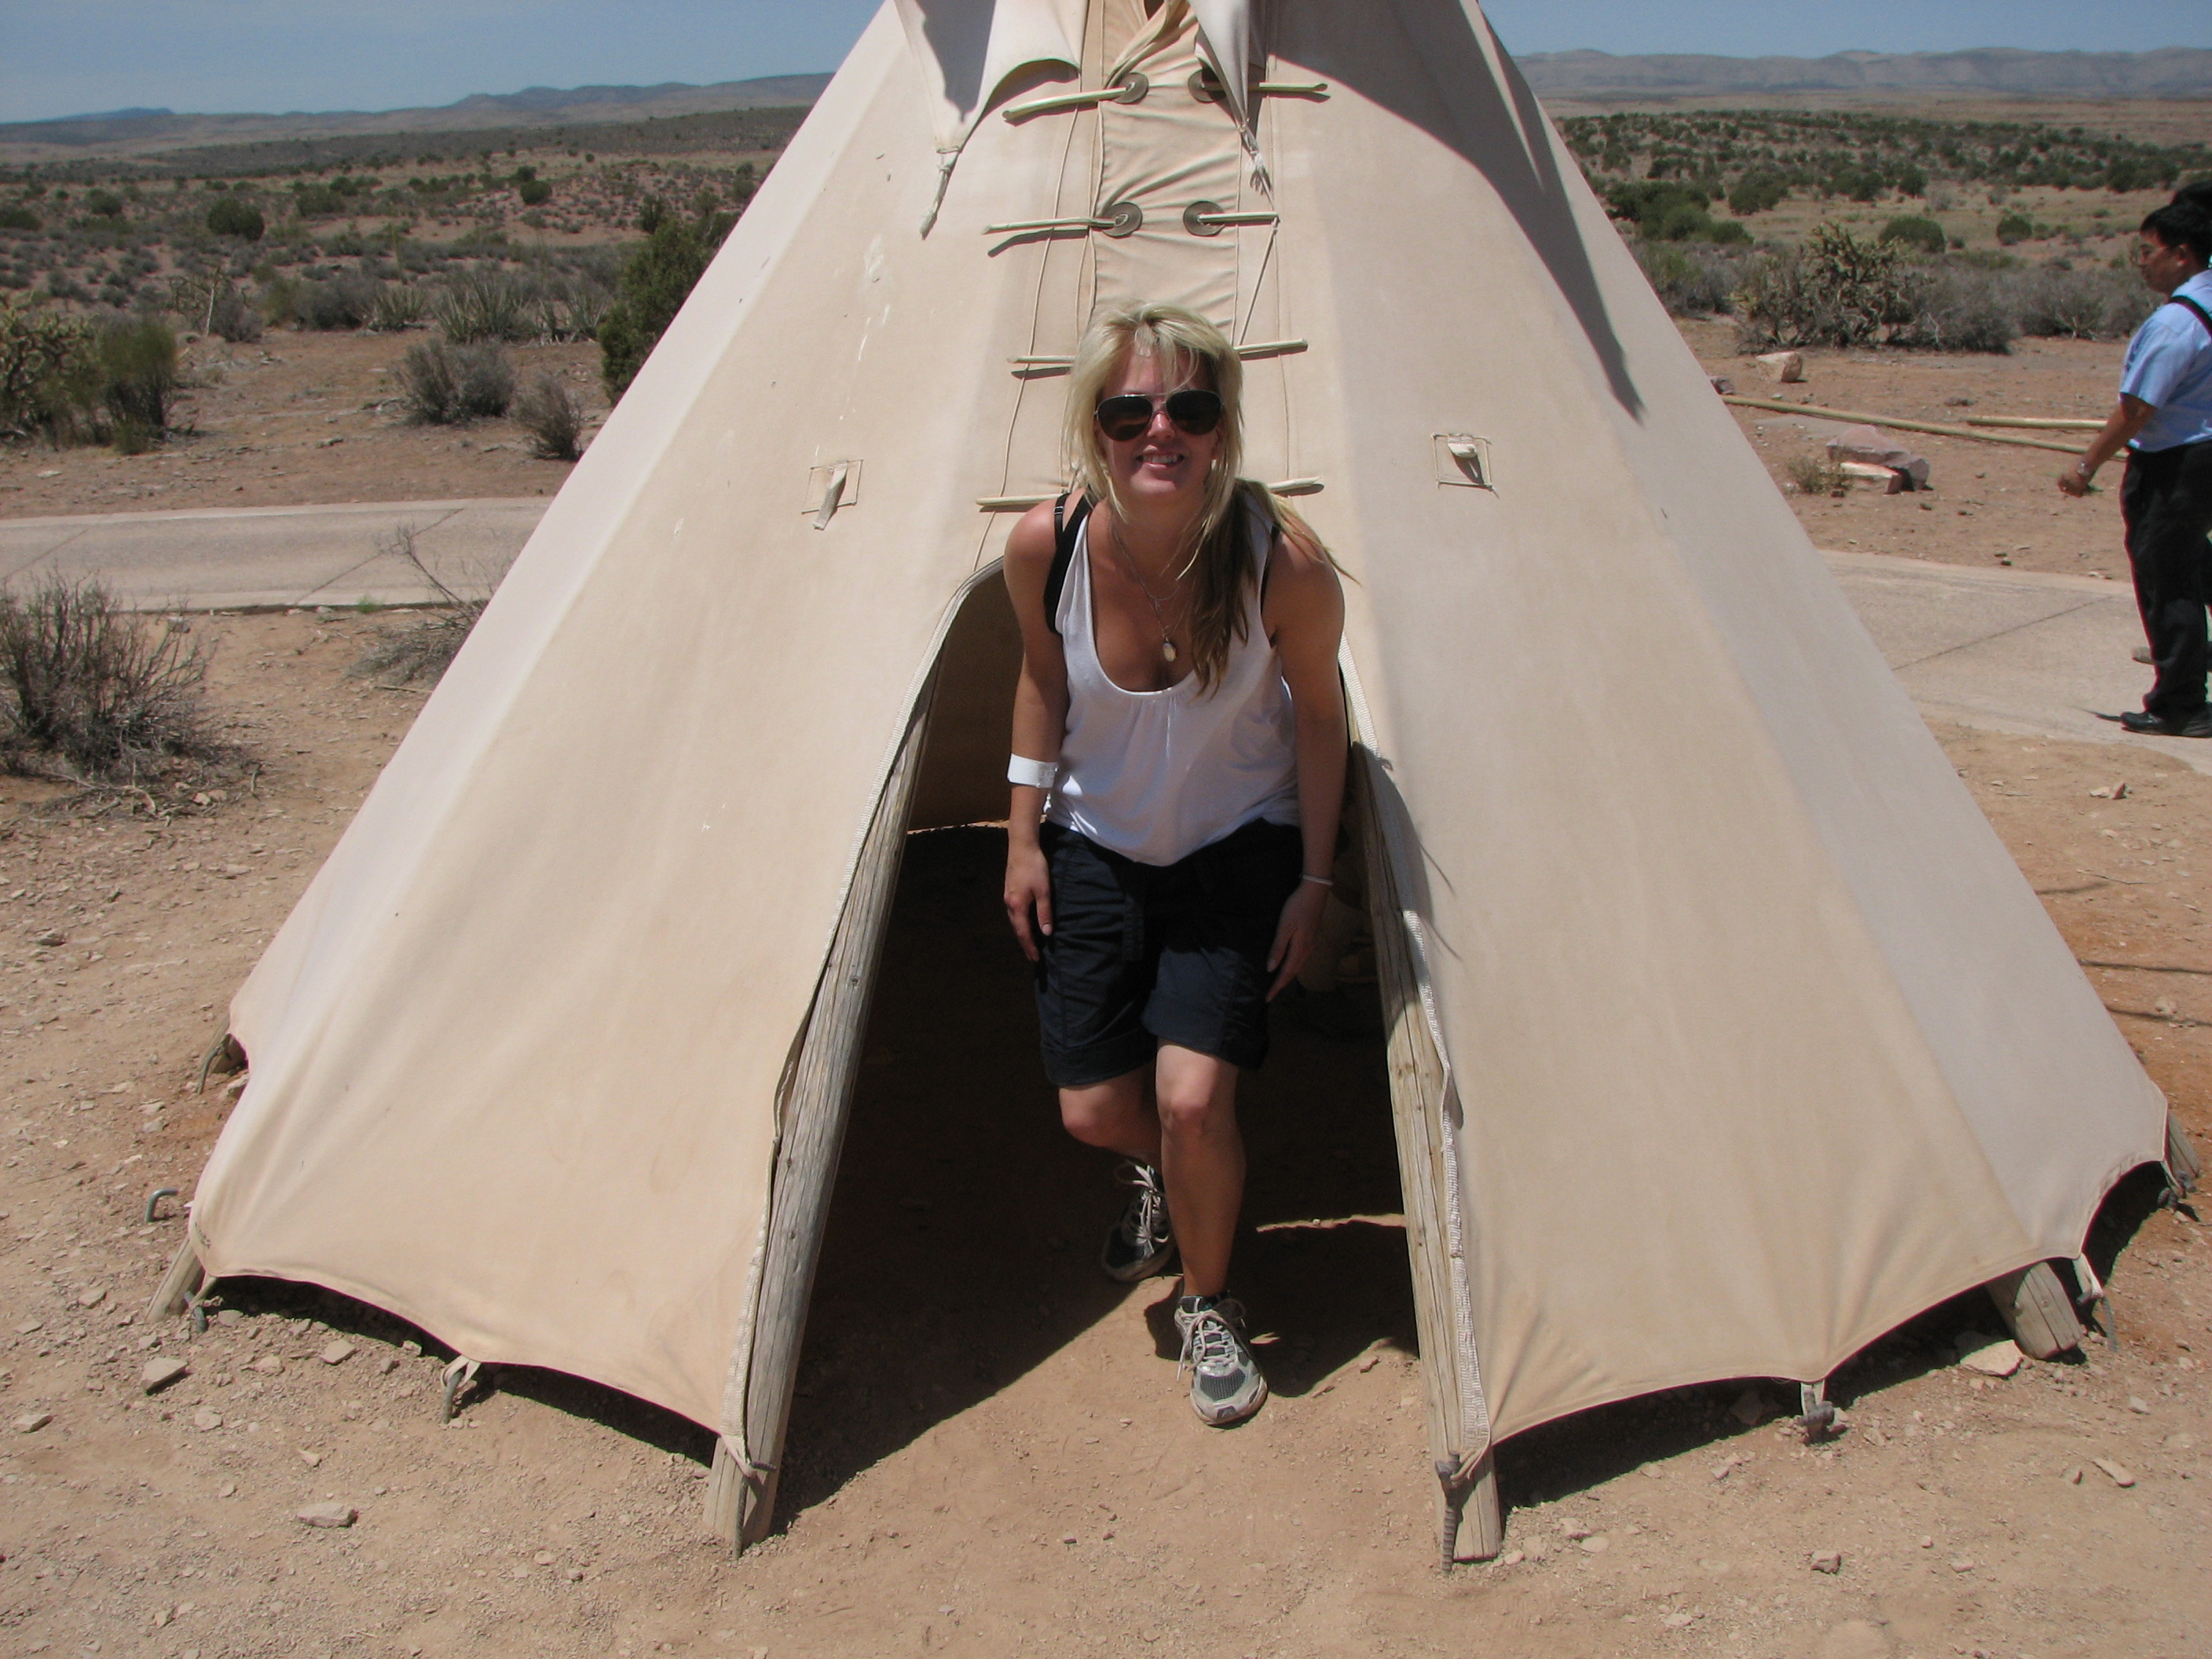 Emelie coming out of a tipi